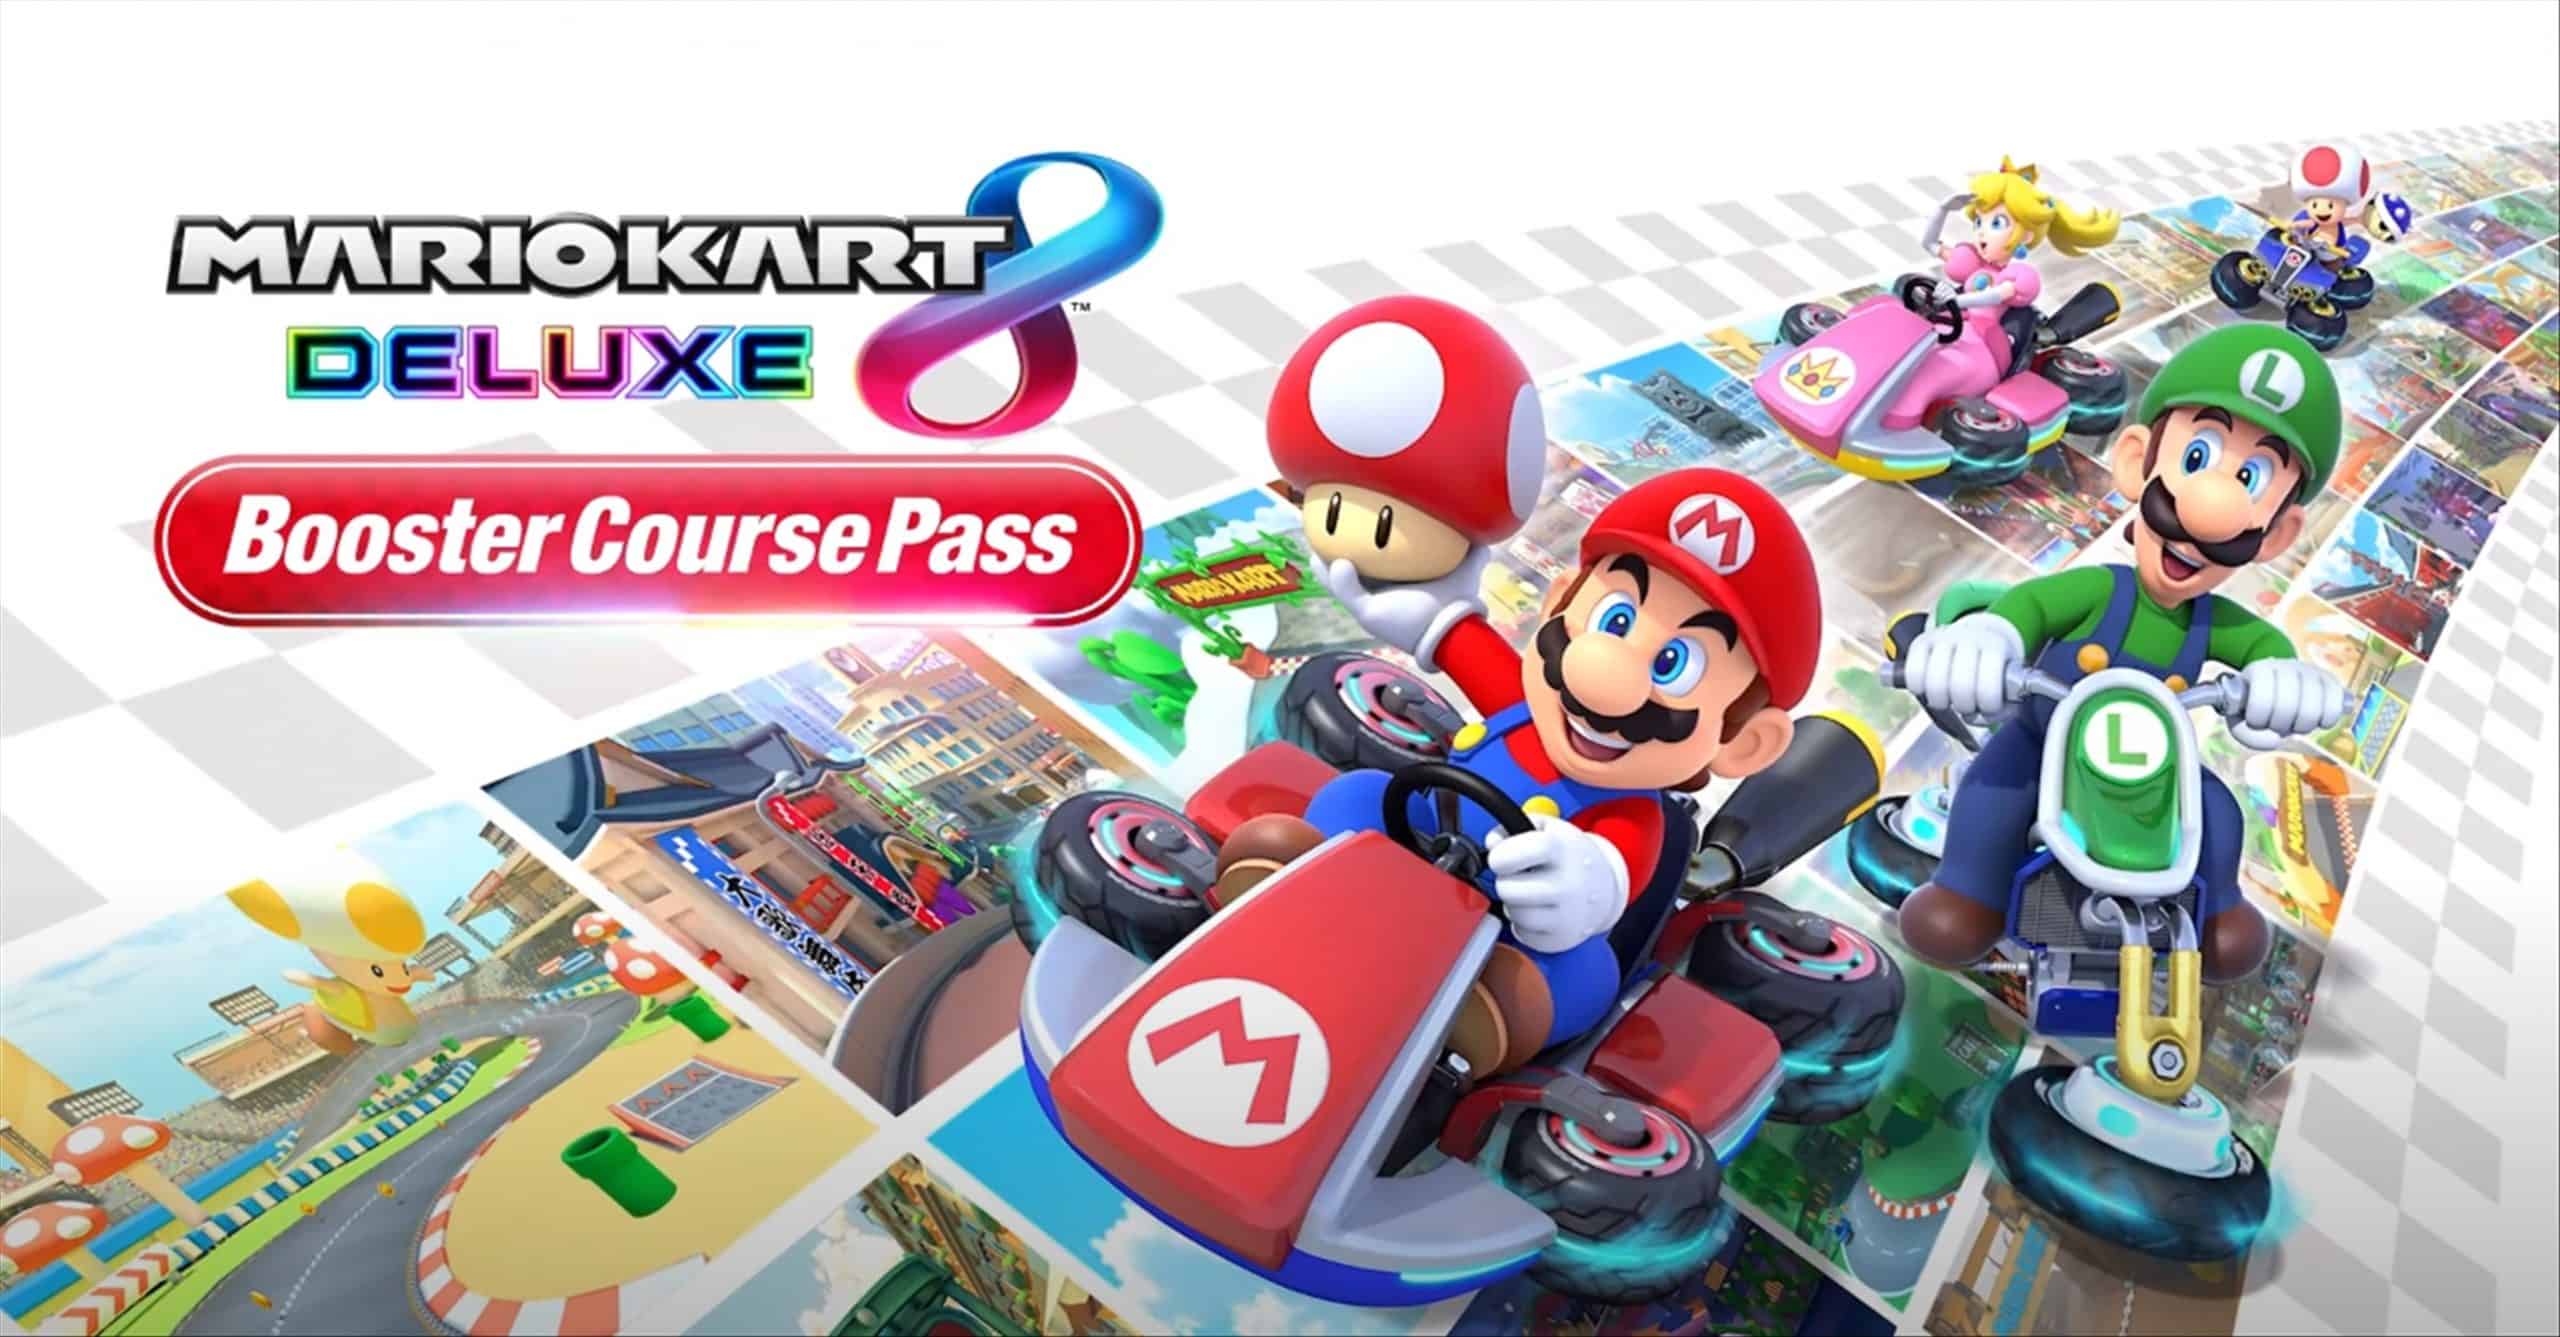 Get these 48 remastered Mario Kart courses for the Mario Kart 8 Deluxe!